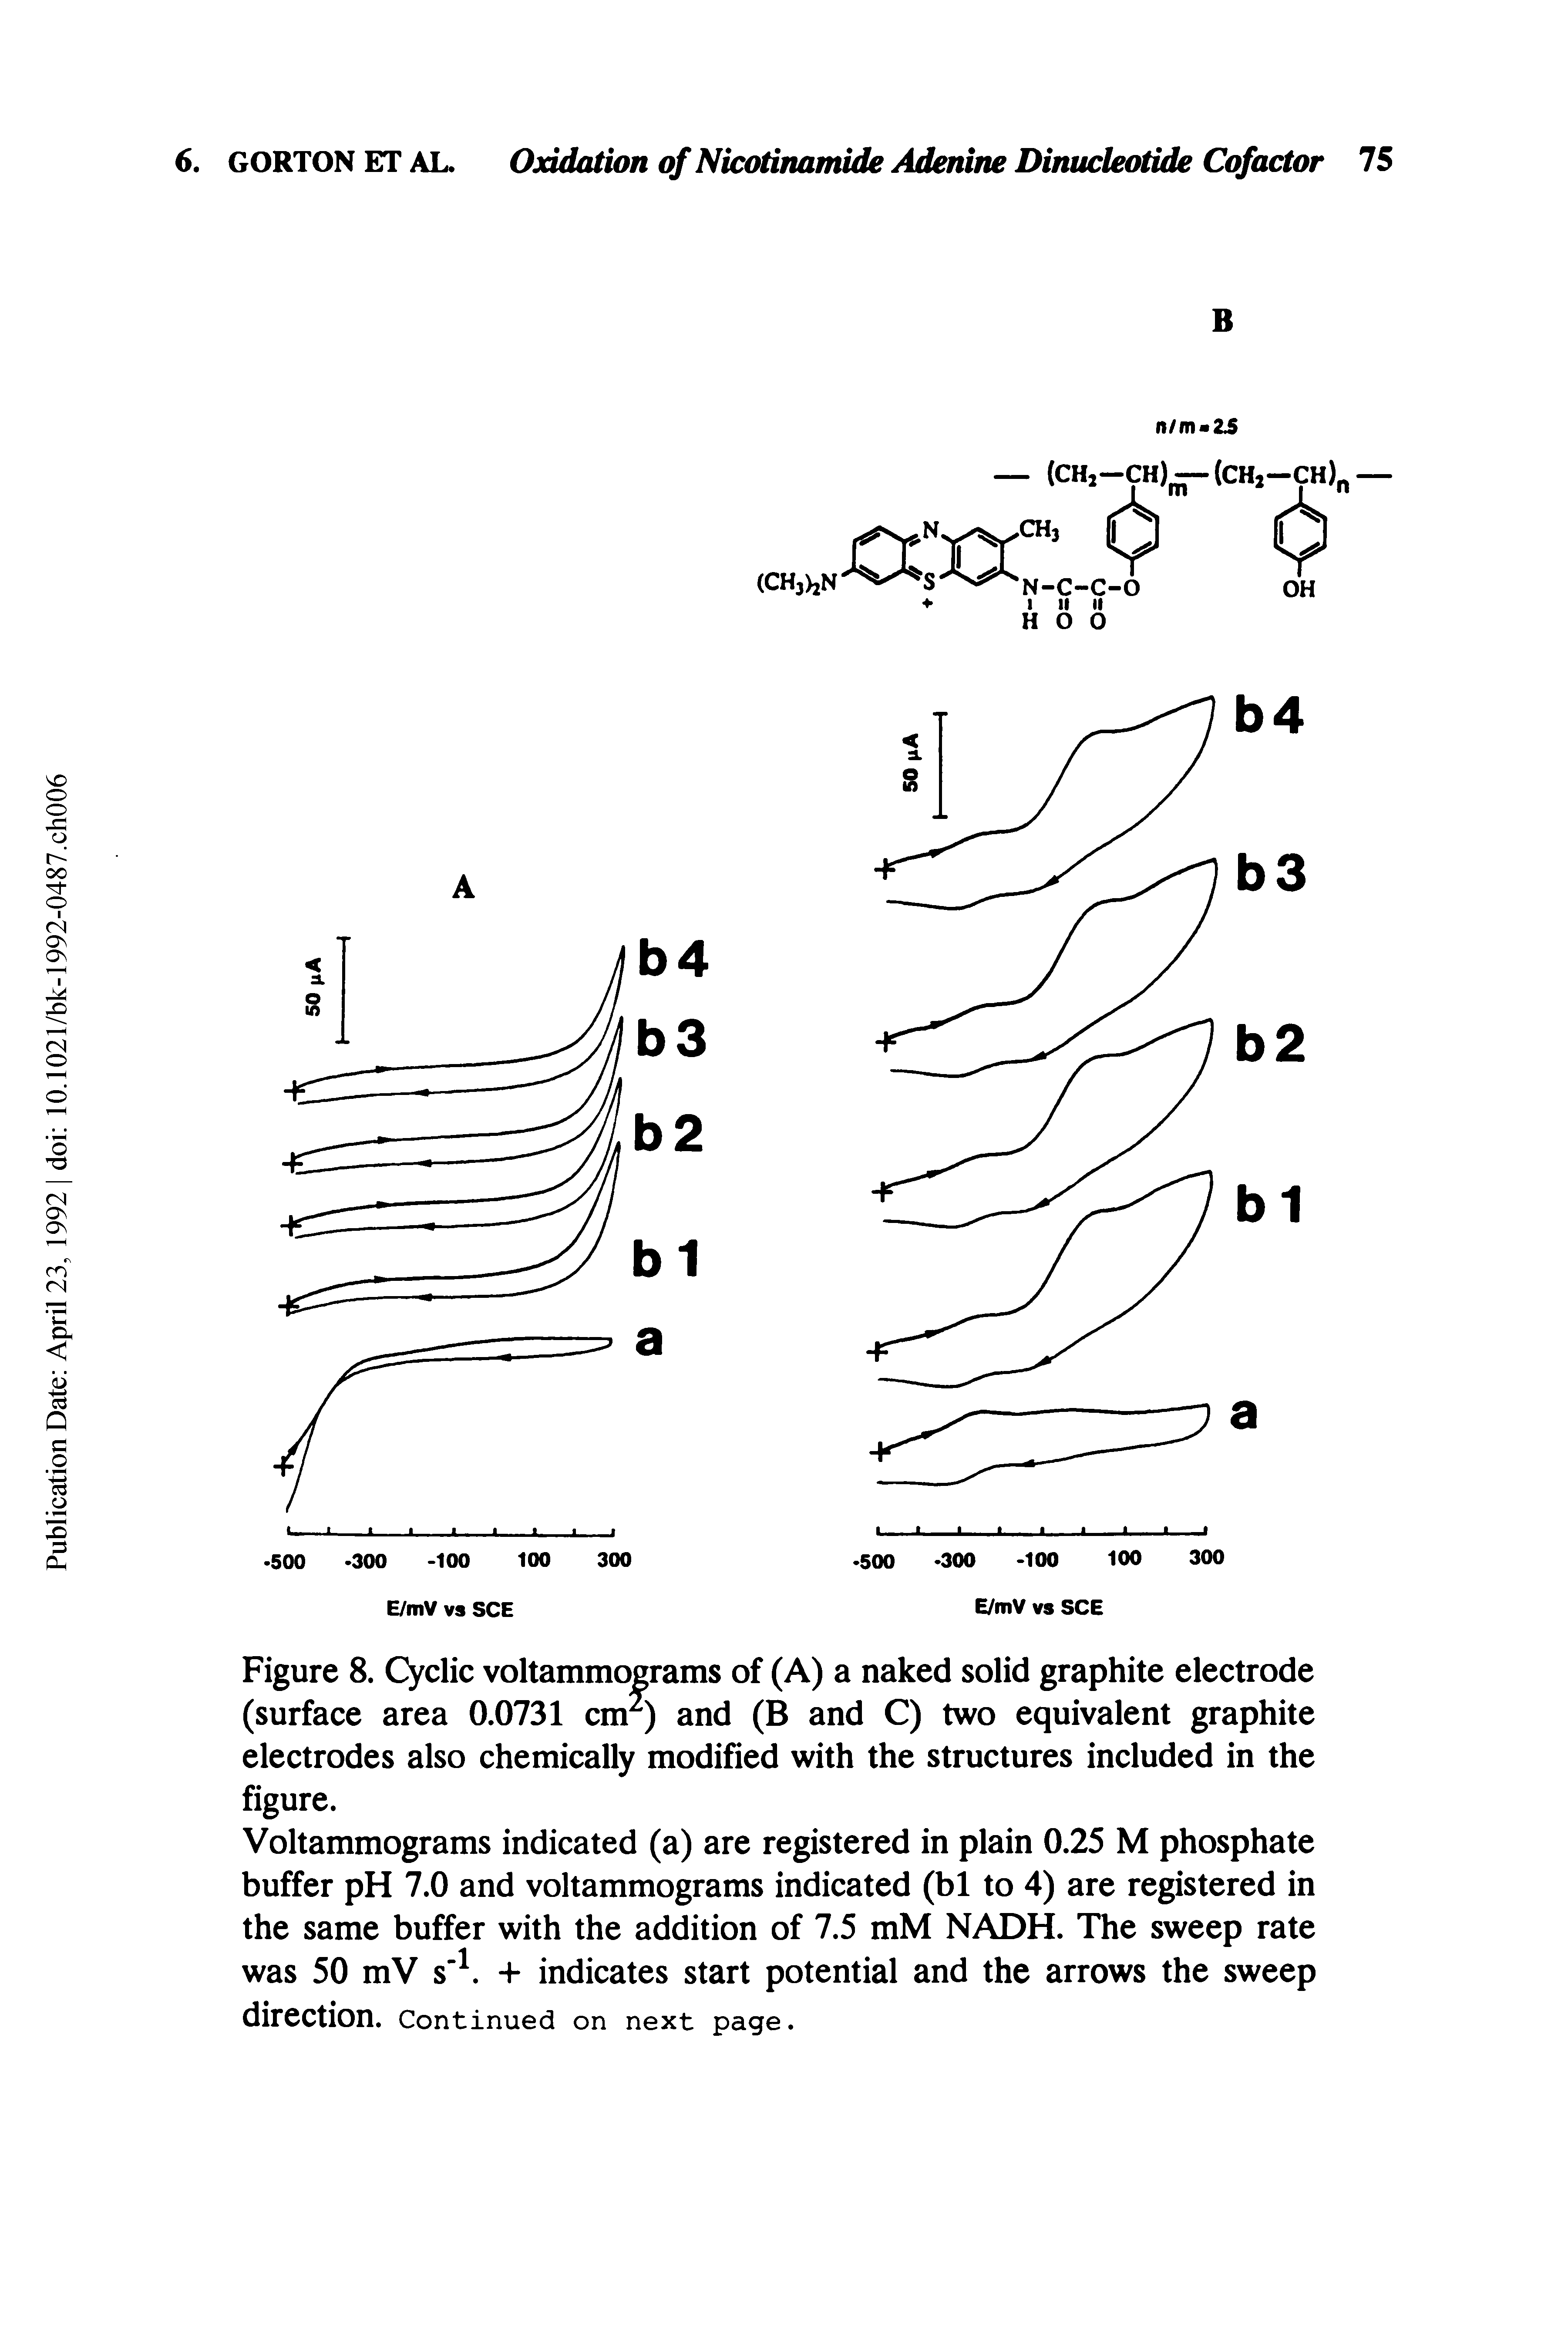 Figure 8. Cyclic voltammograms of (A) a naked solid graphite electrode (surface area 0.0731 cnr) and (B and C) two equivalent graphite electrodes also chemically modified with the structures included in the figure.